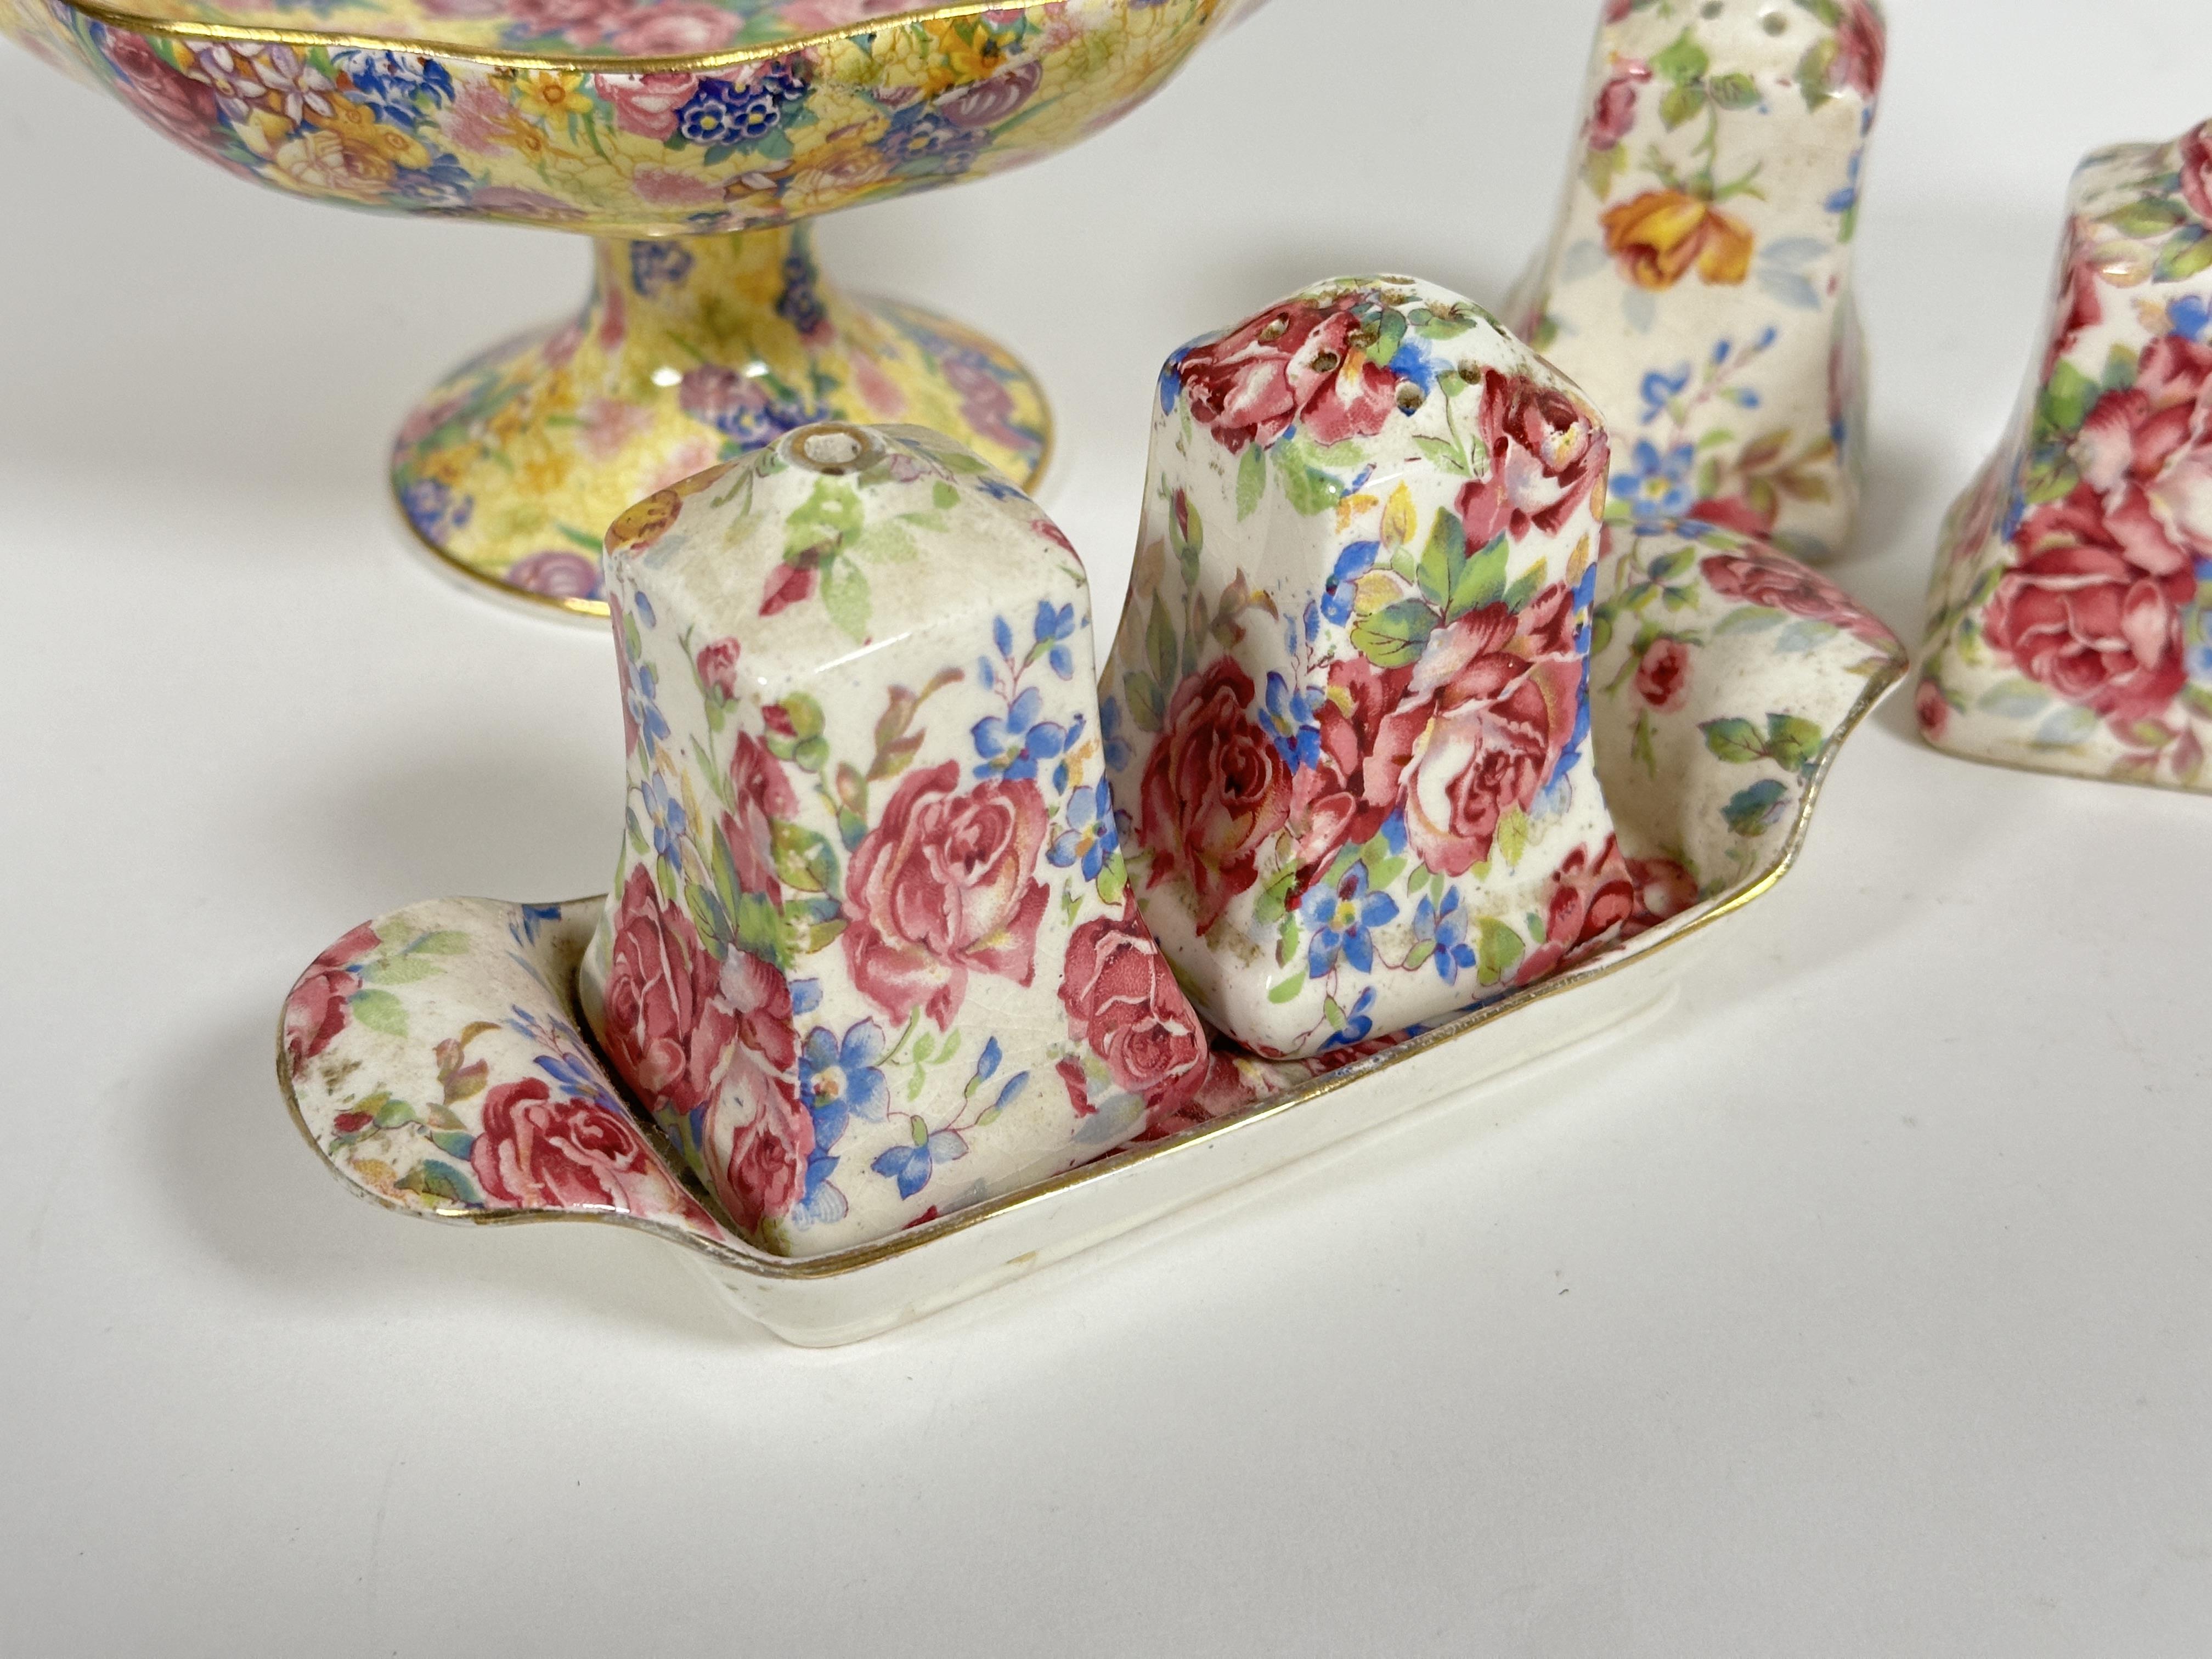 A Royal Winton Welbeck pattern Chintz ware comport shows no signs of damage or repairs H x 8.5cm D - Image 2 of 5